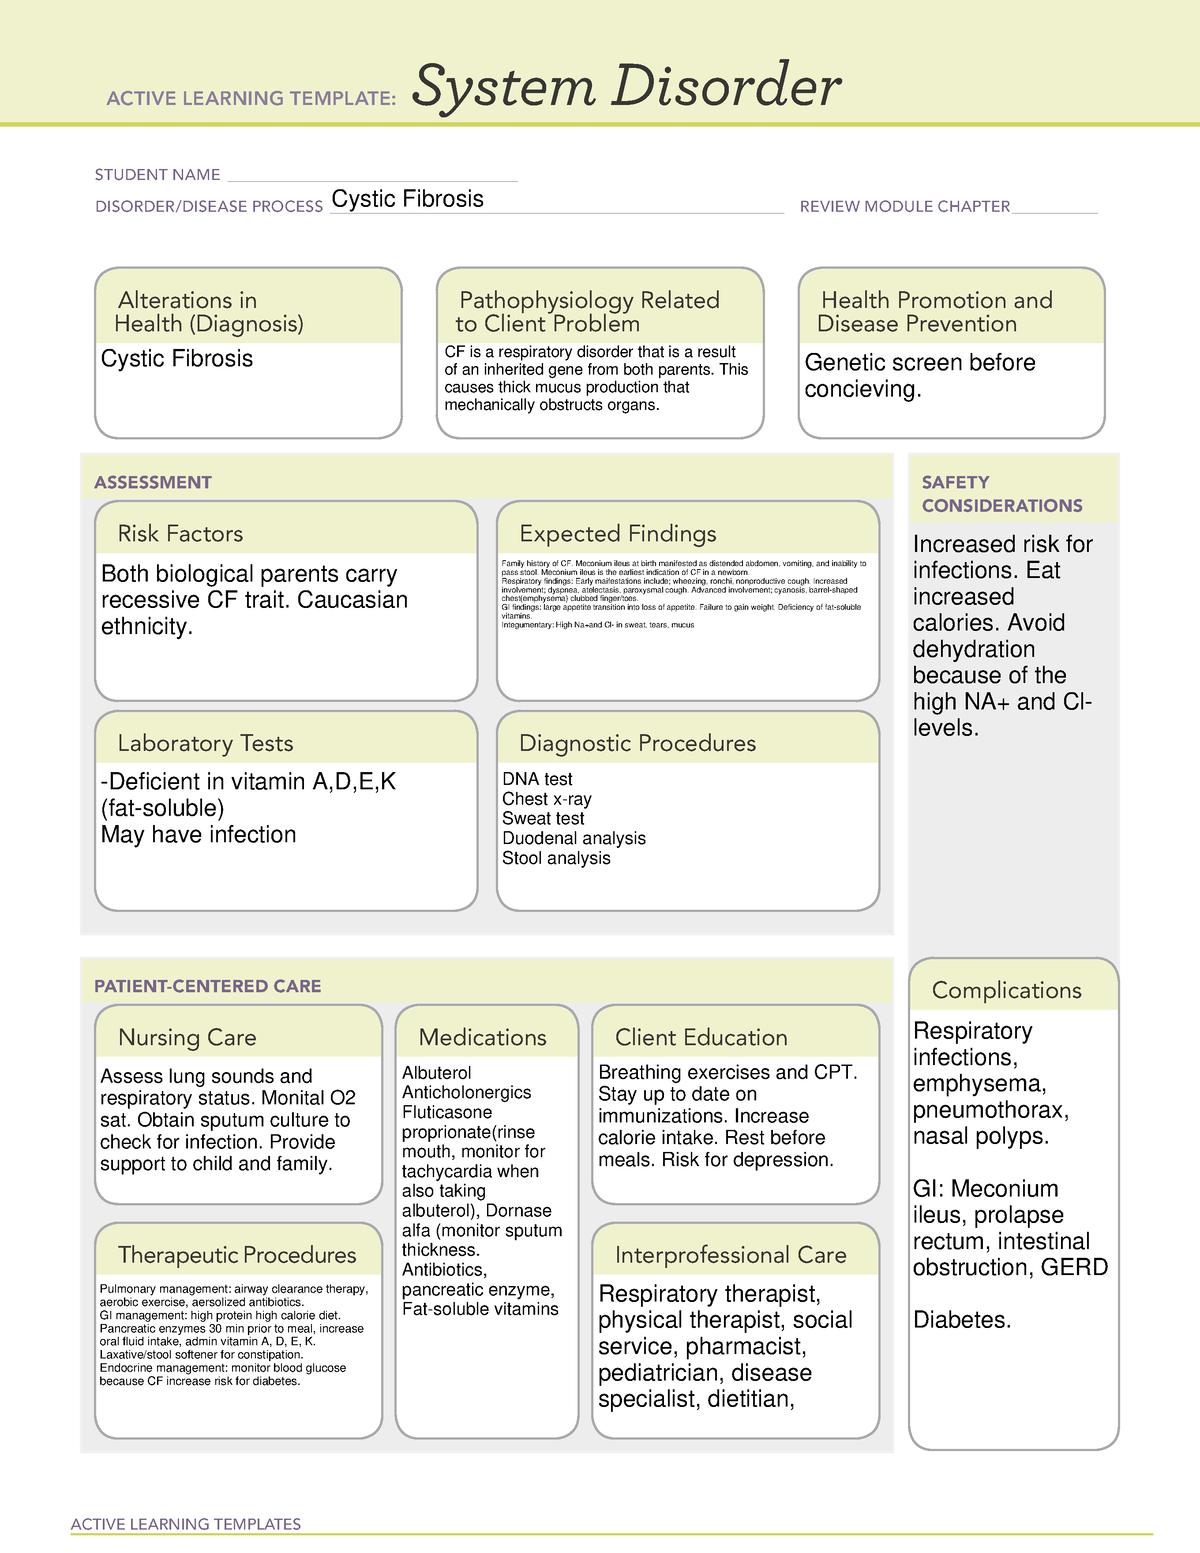 Cystic Fibrosis Concept Map ACTIVE LEARNING TEMPLATES System Disorder